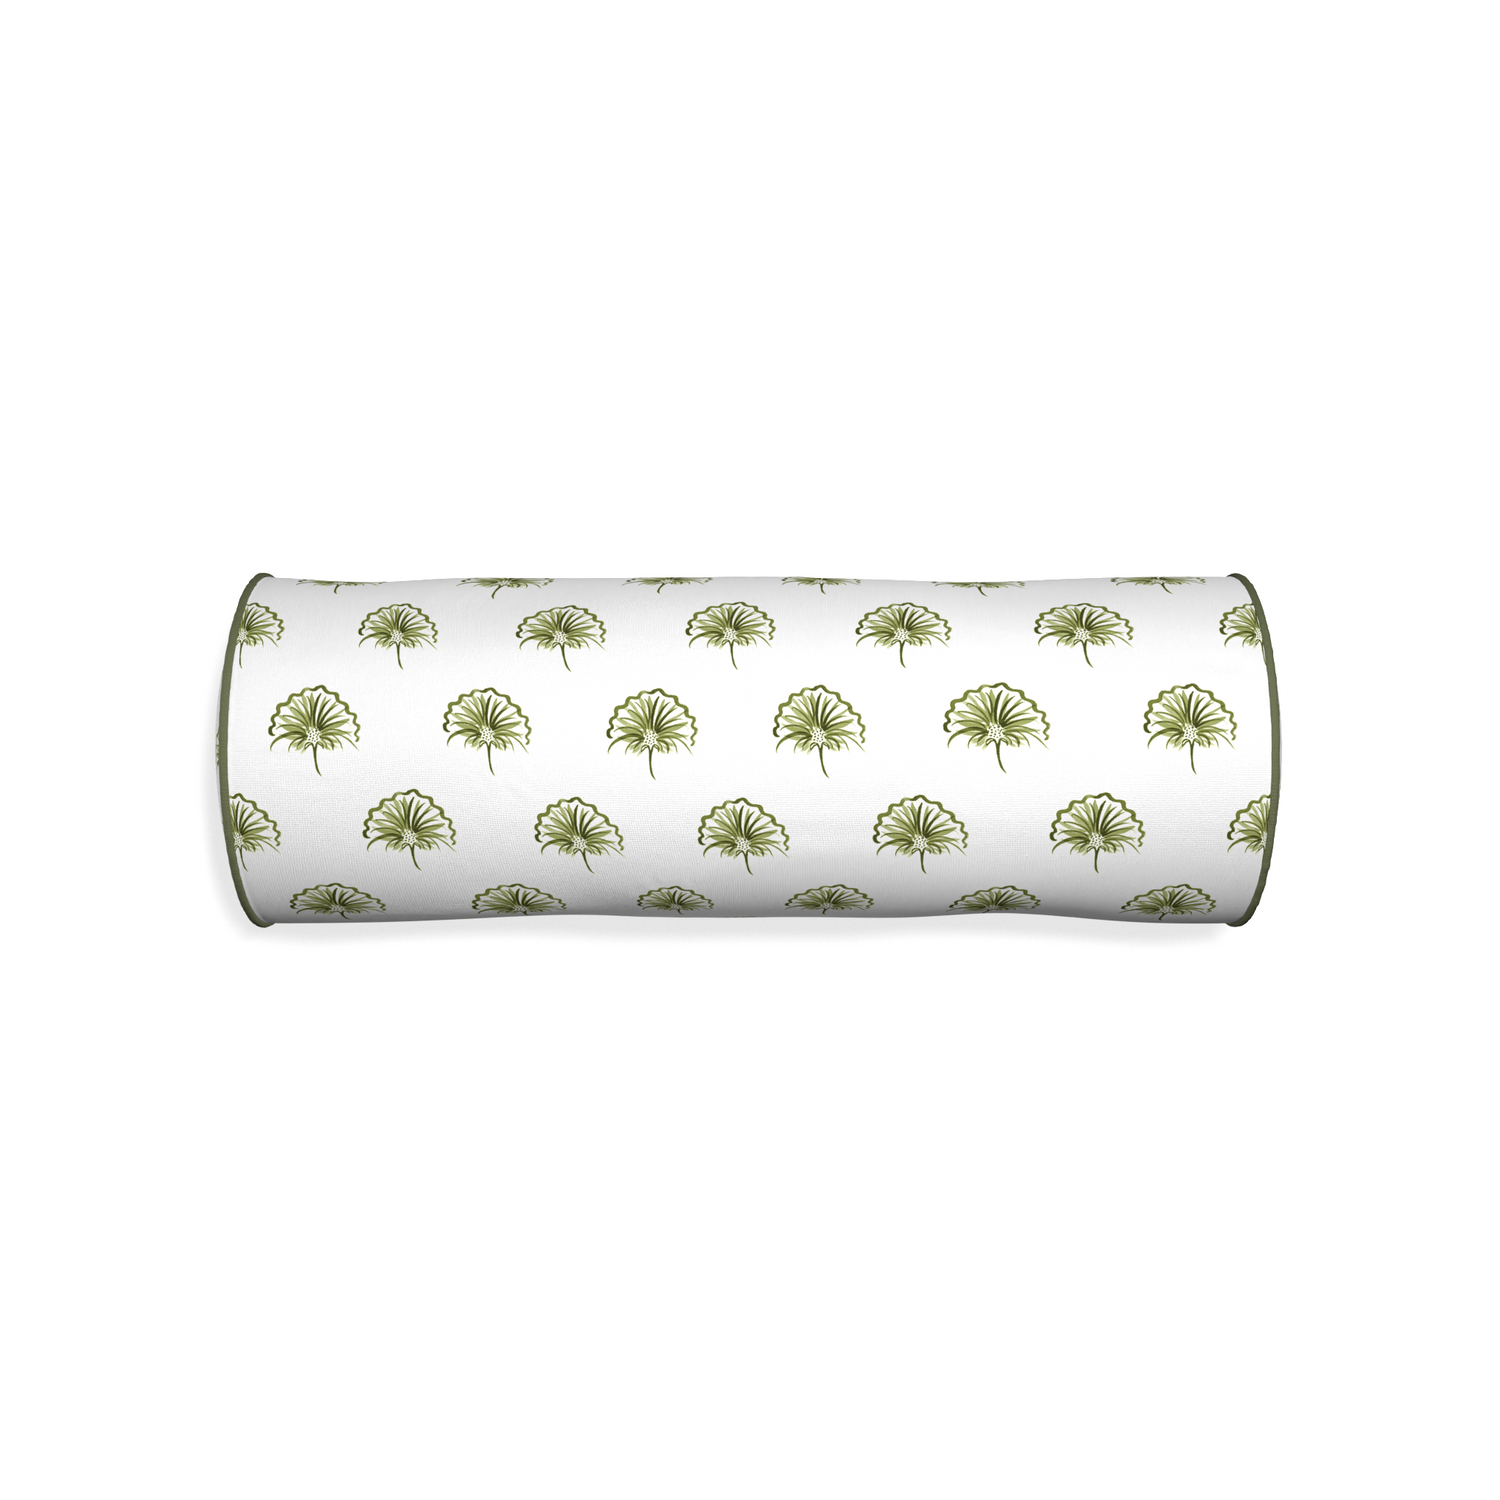 Bolster penelope moss custom pillow with f piping on white background